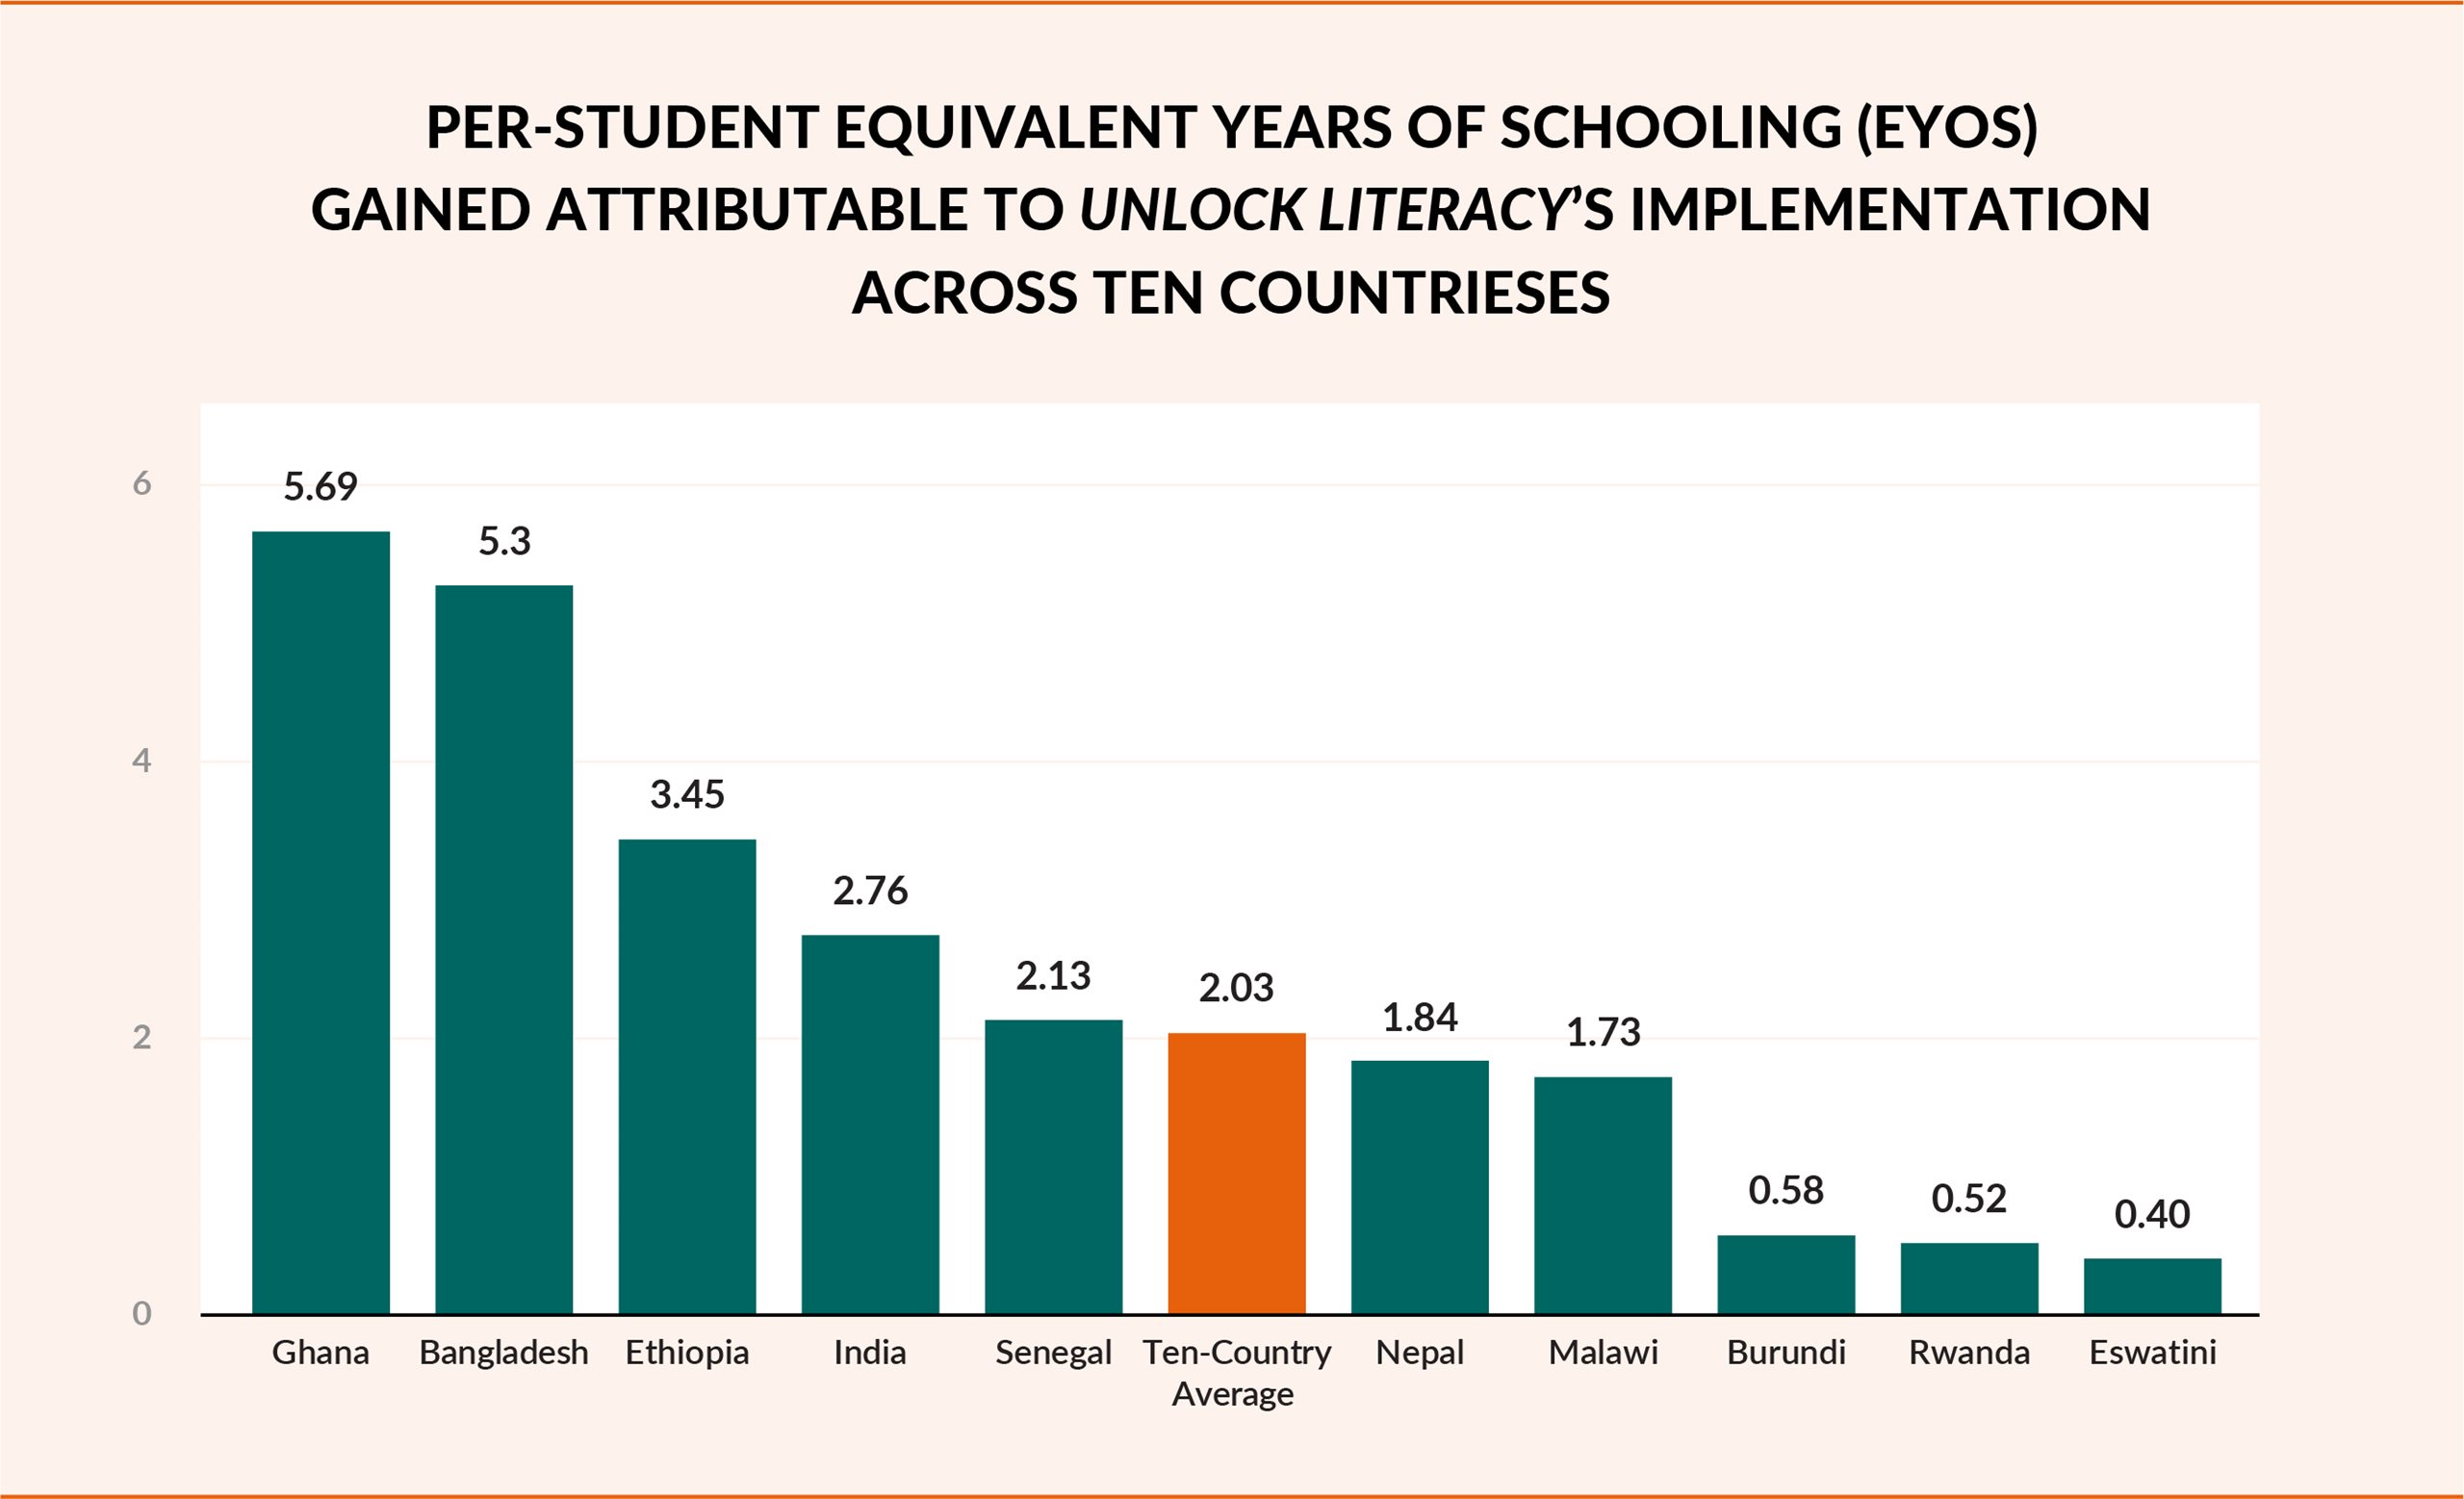 Graph shows per-student equivalent years of schooling gained attributable to Unlock Literacy’s implementation across ten countries.